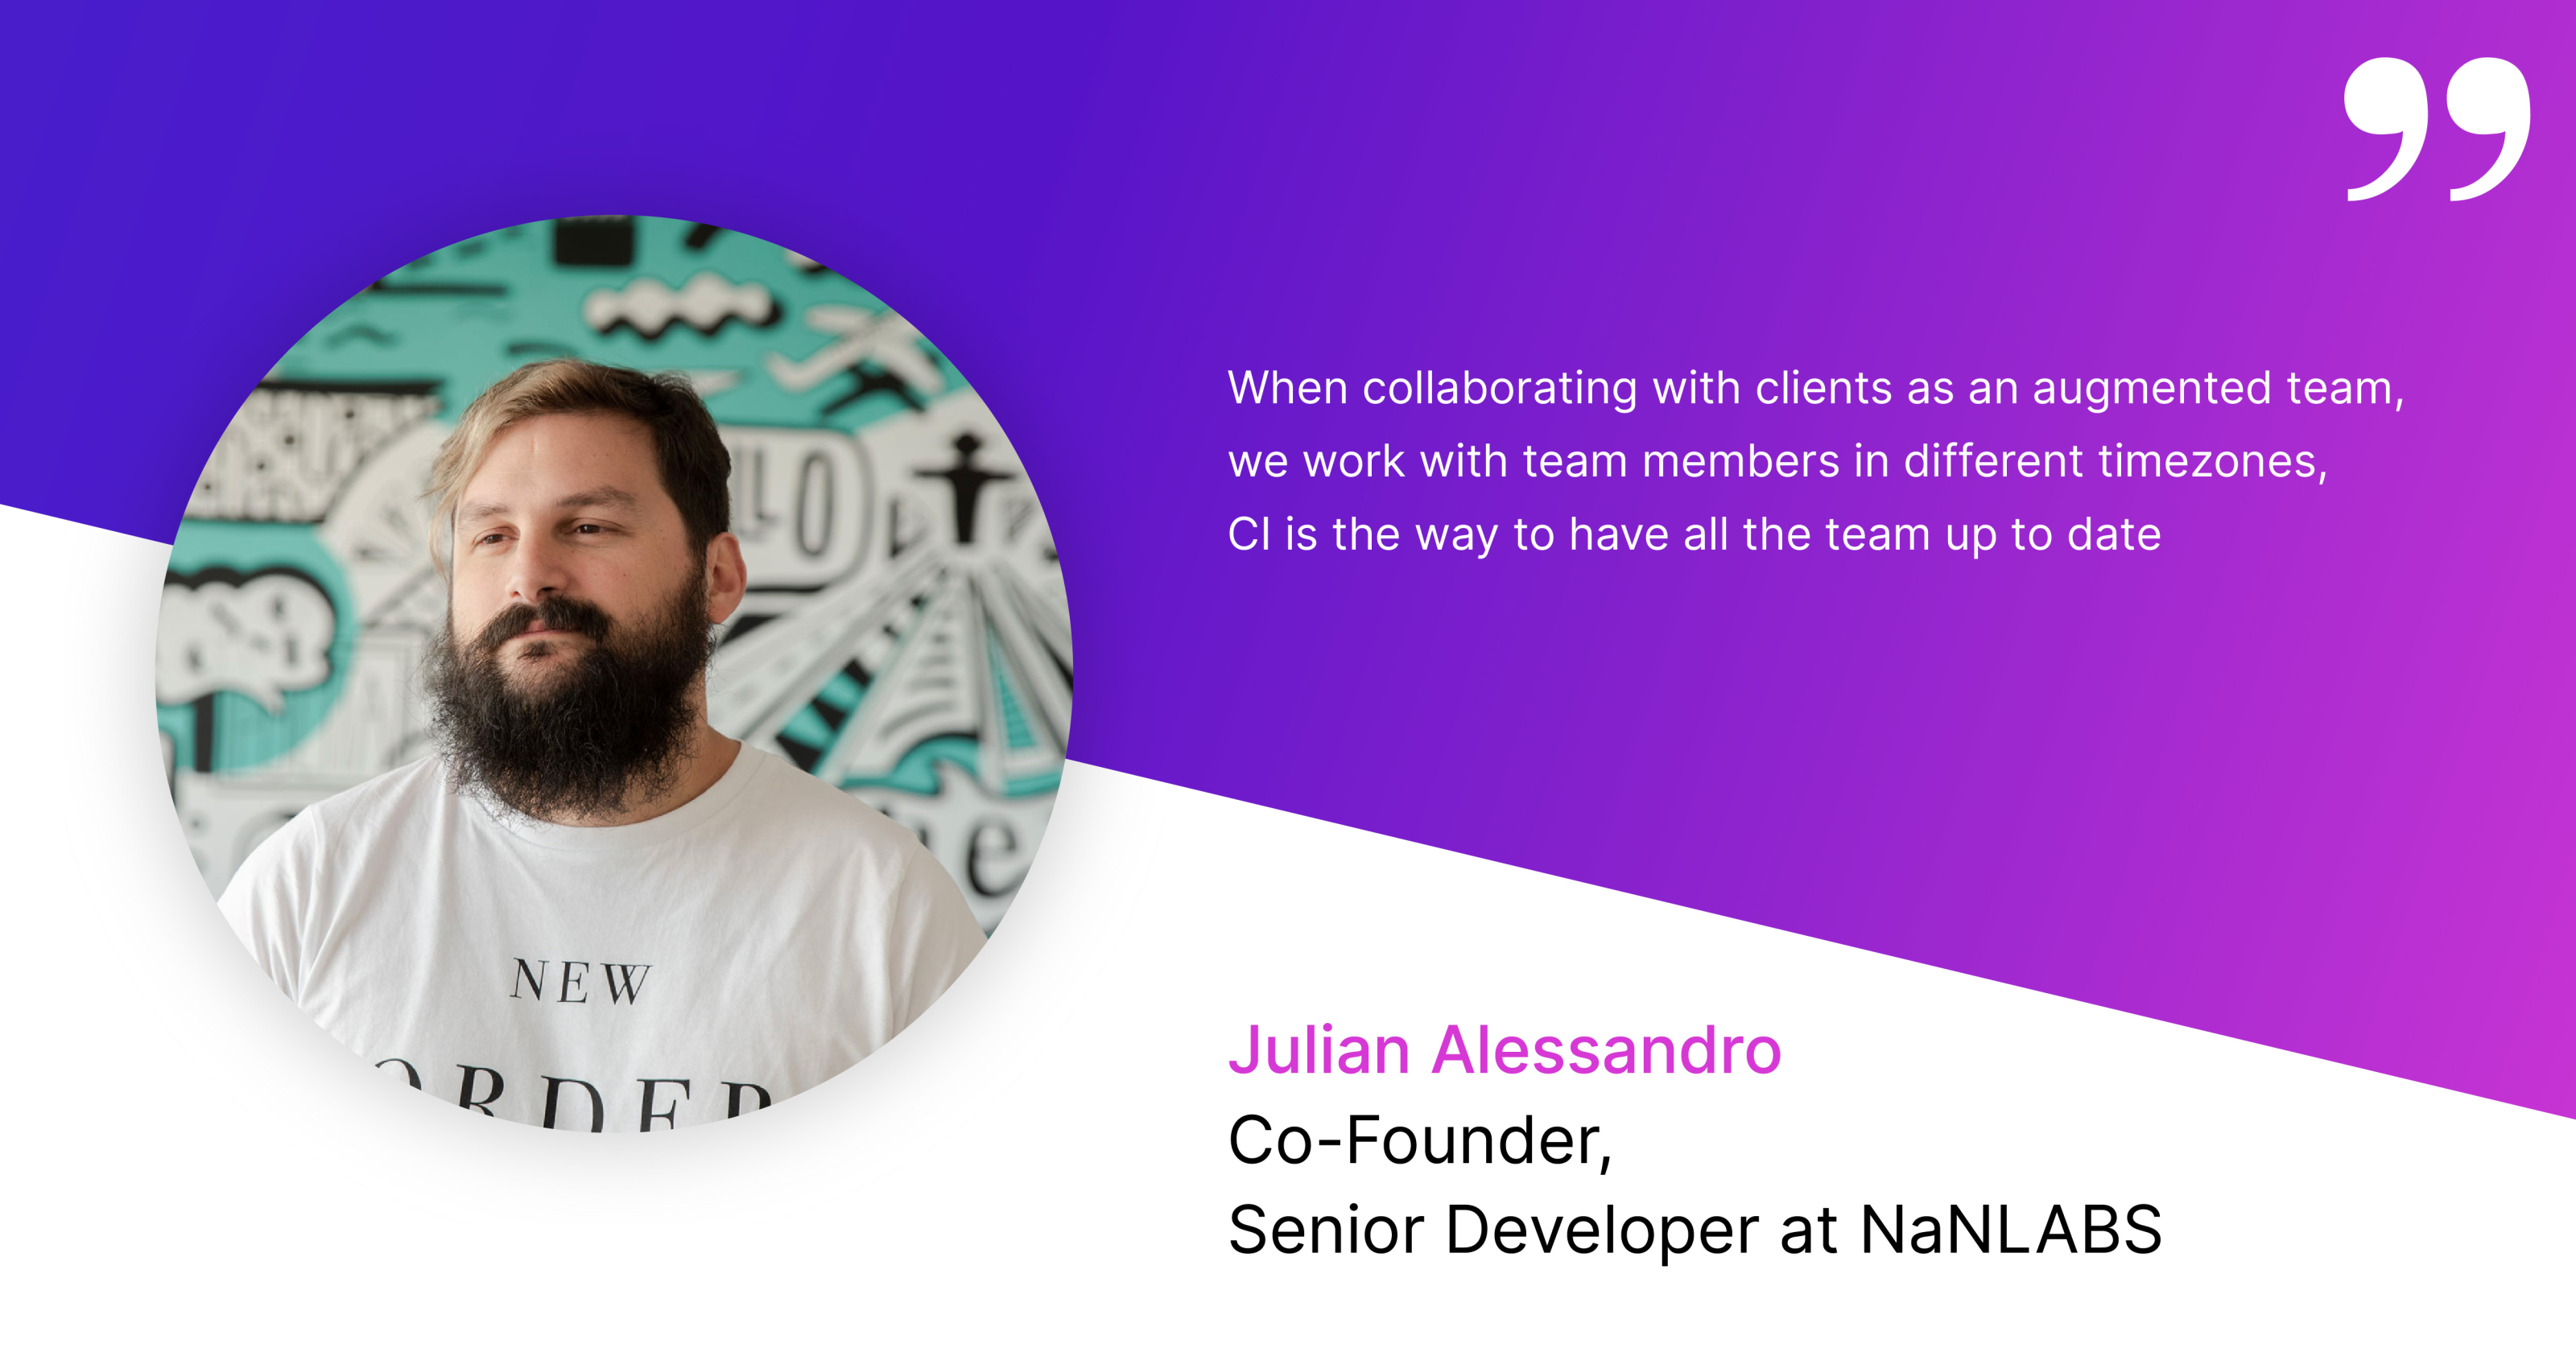  Quote from NaNLABS co-founder Julian Alessandro on using CI to work with remote teams